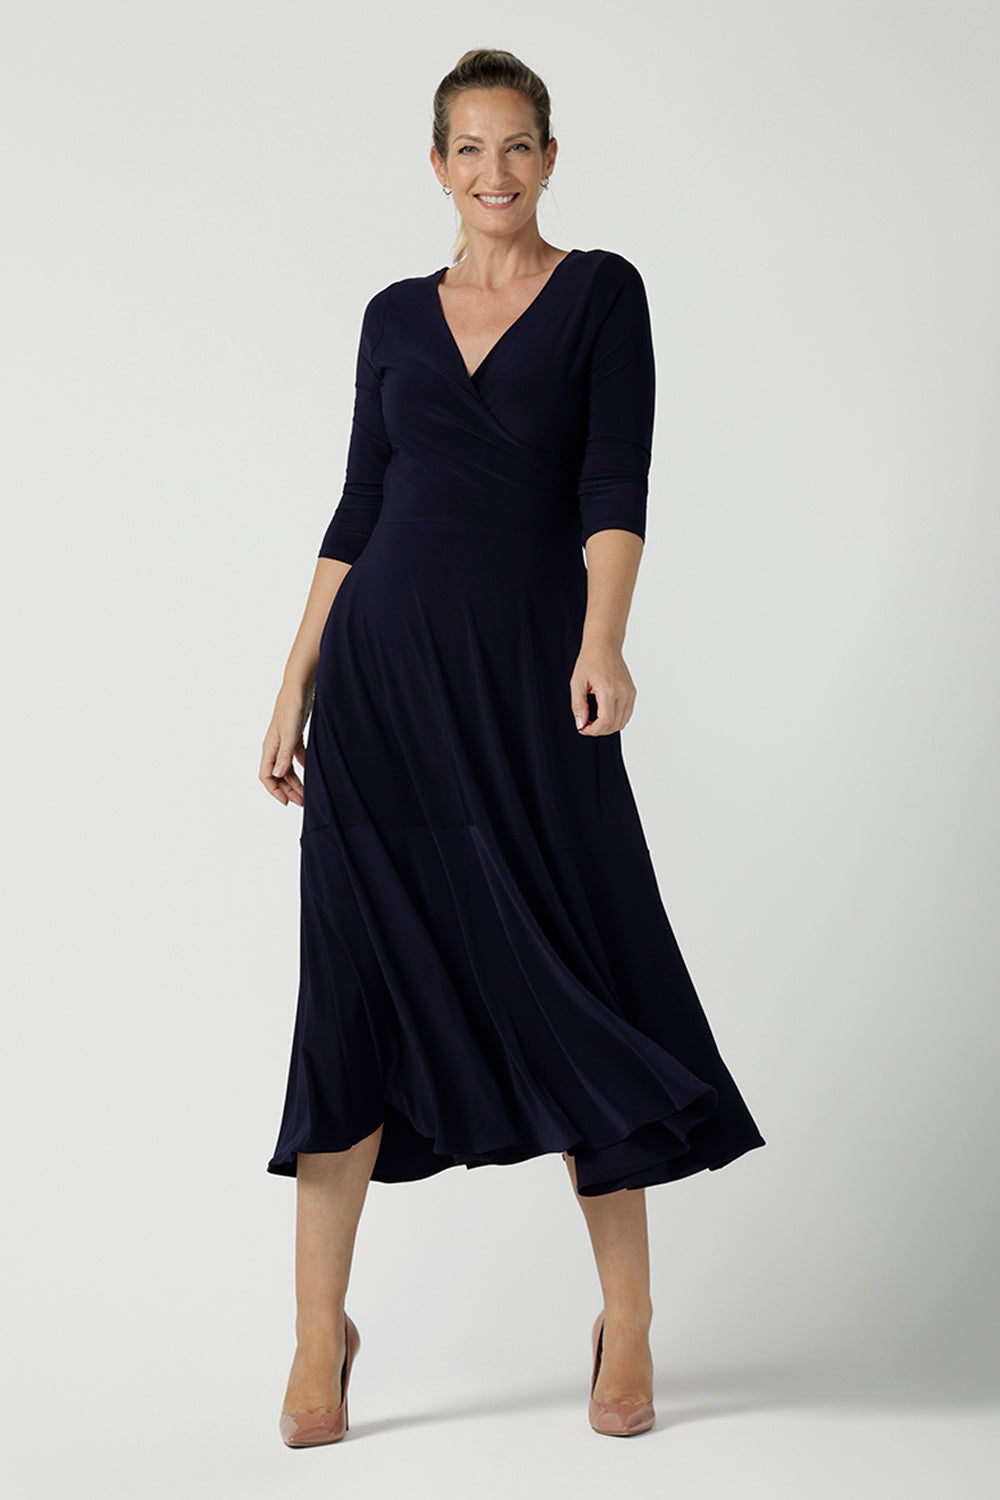 Size 10 woman wears a Bettina Reversible dress in Navy. Stylish workwear for women. Midi length with functional pockets. Made in Australia for women size 8 - 24. Soft Navy jersey fabric.